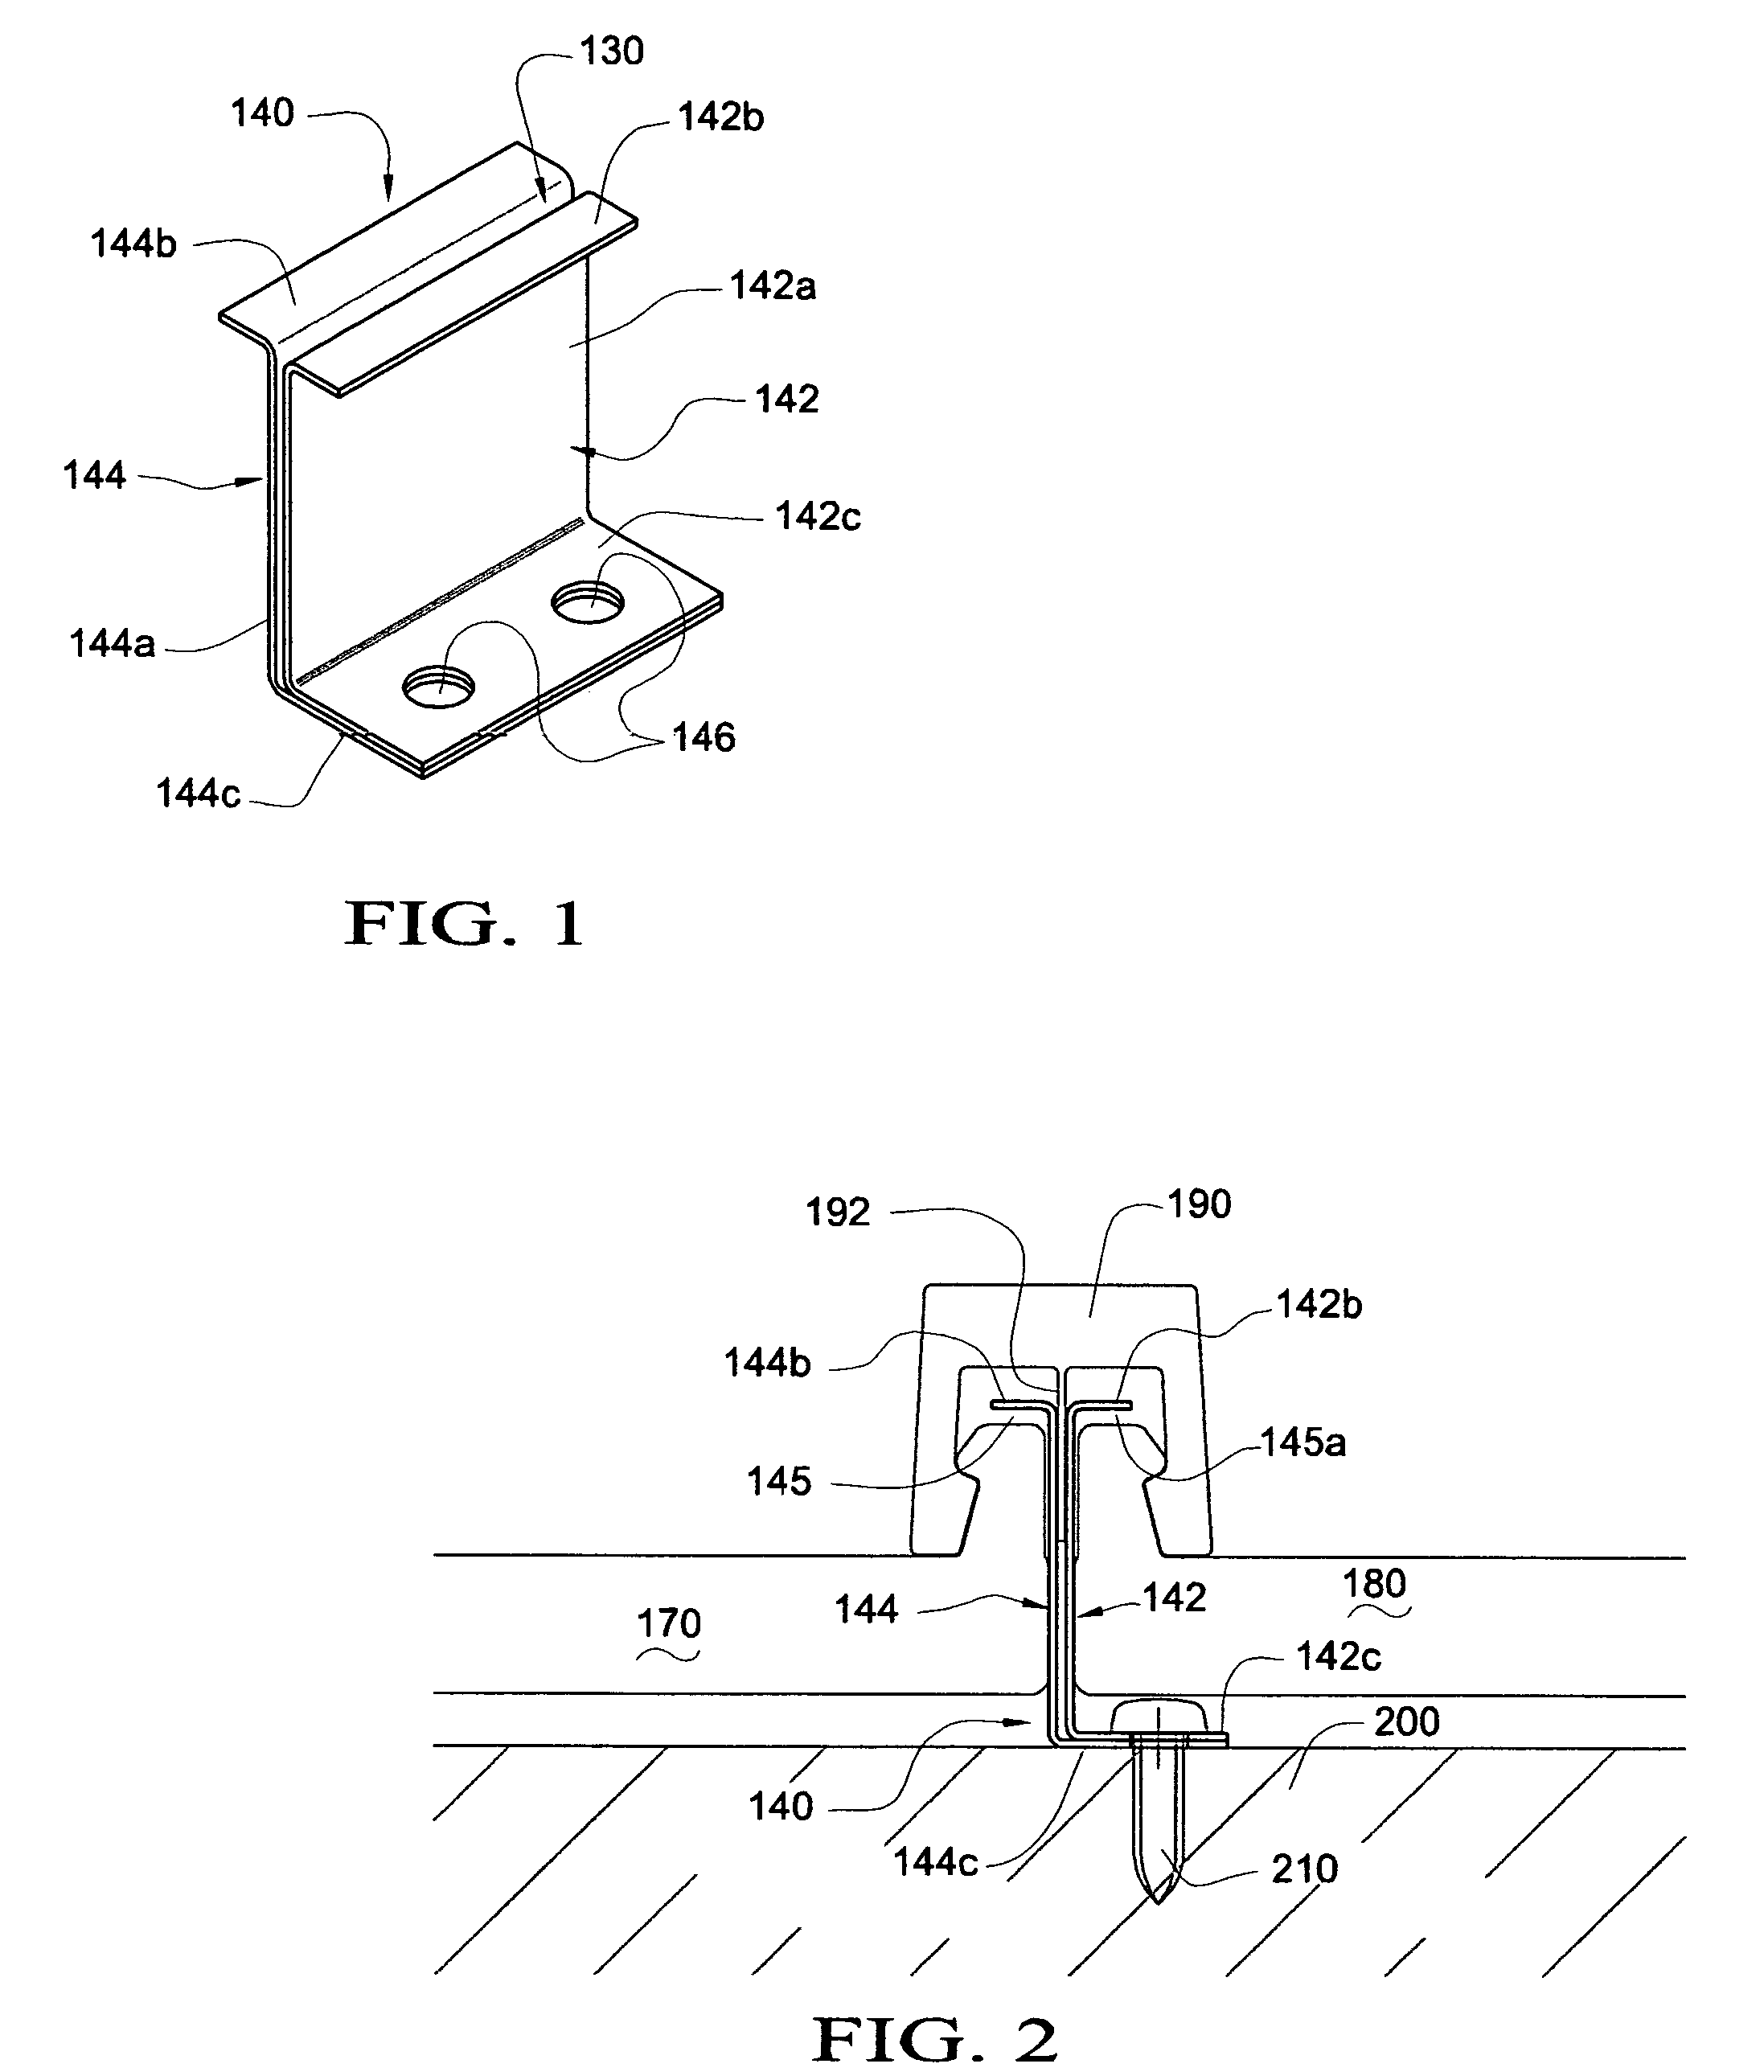 Panel clip assembly for use with roof or wall panels